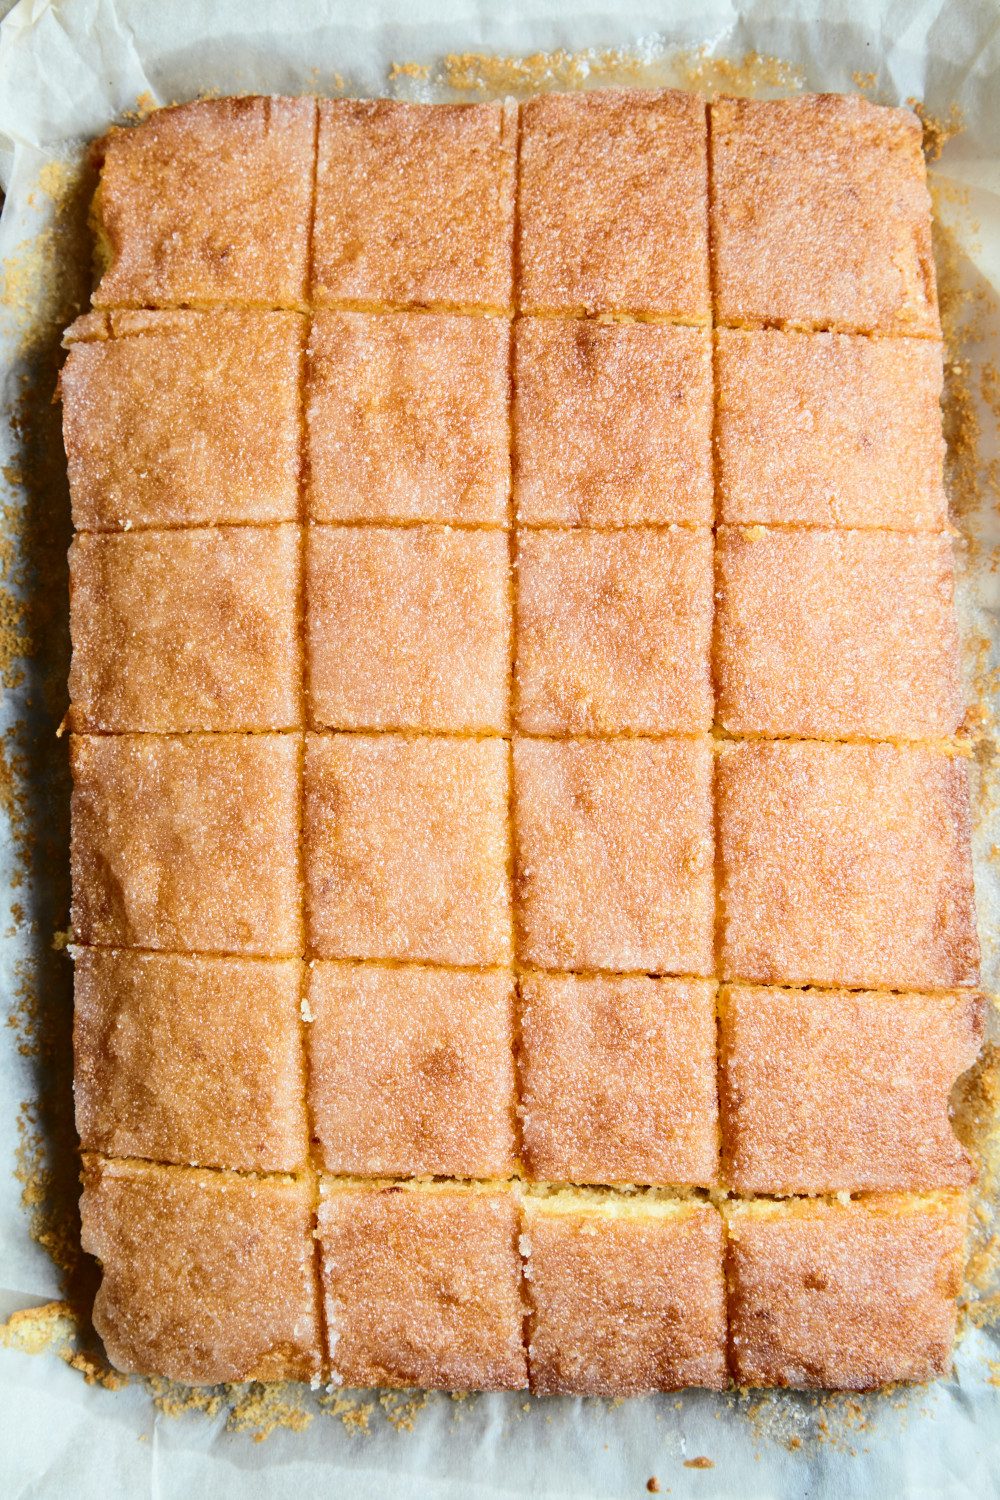 Let it cool down completely and then cut into squares lemon pie with frosting